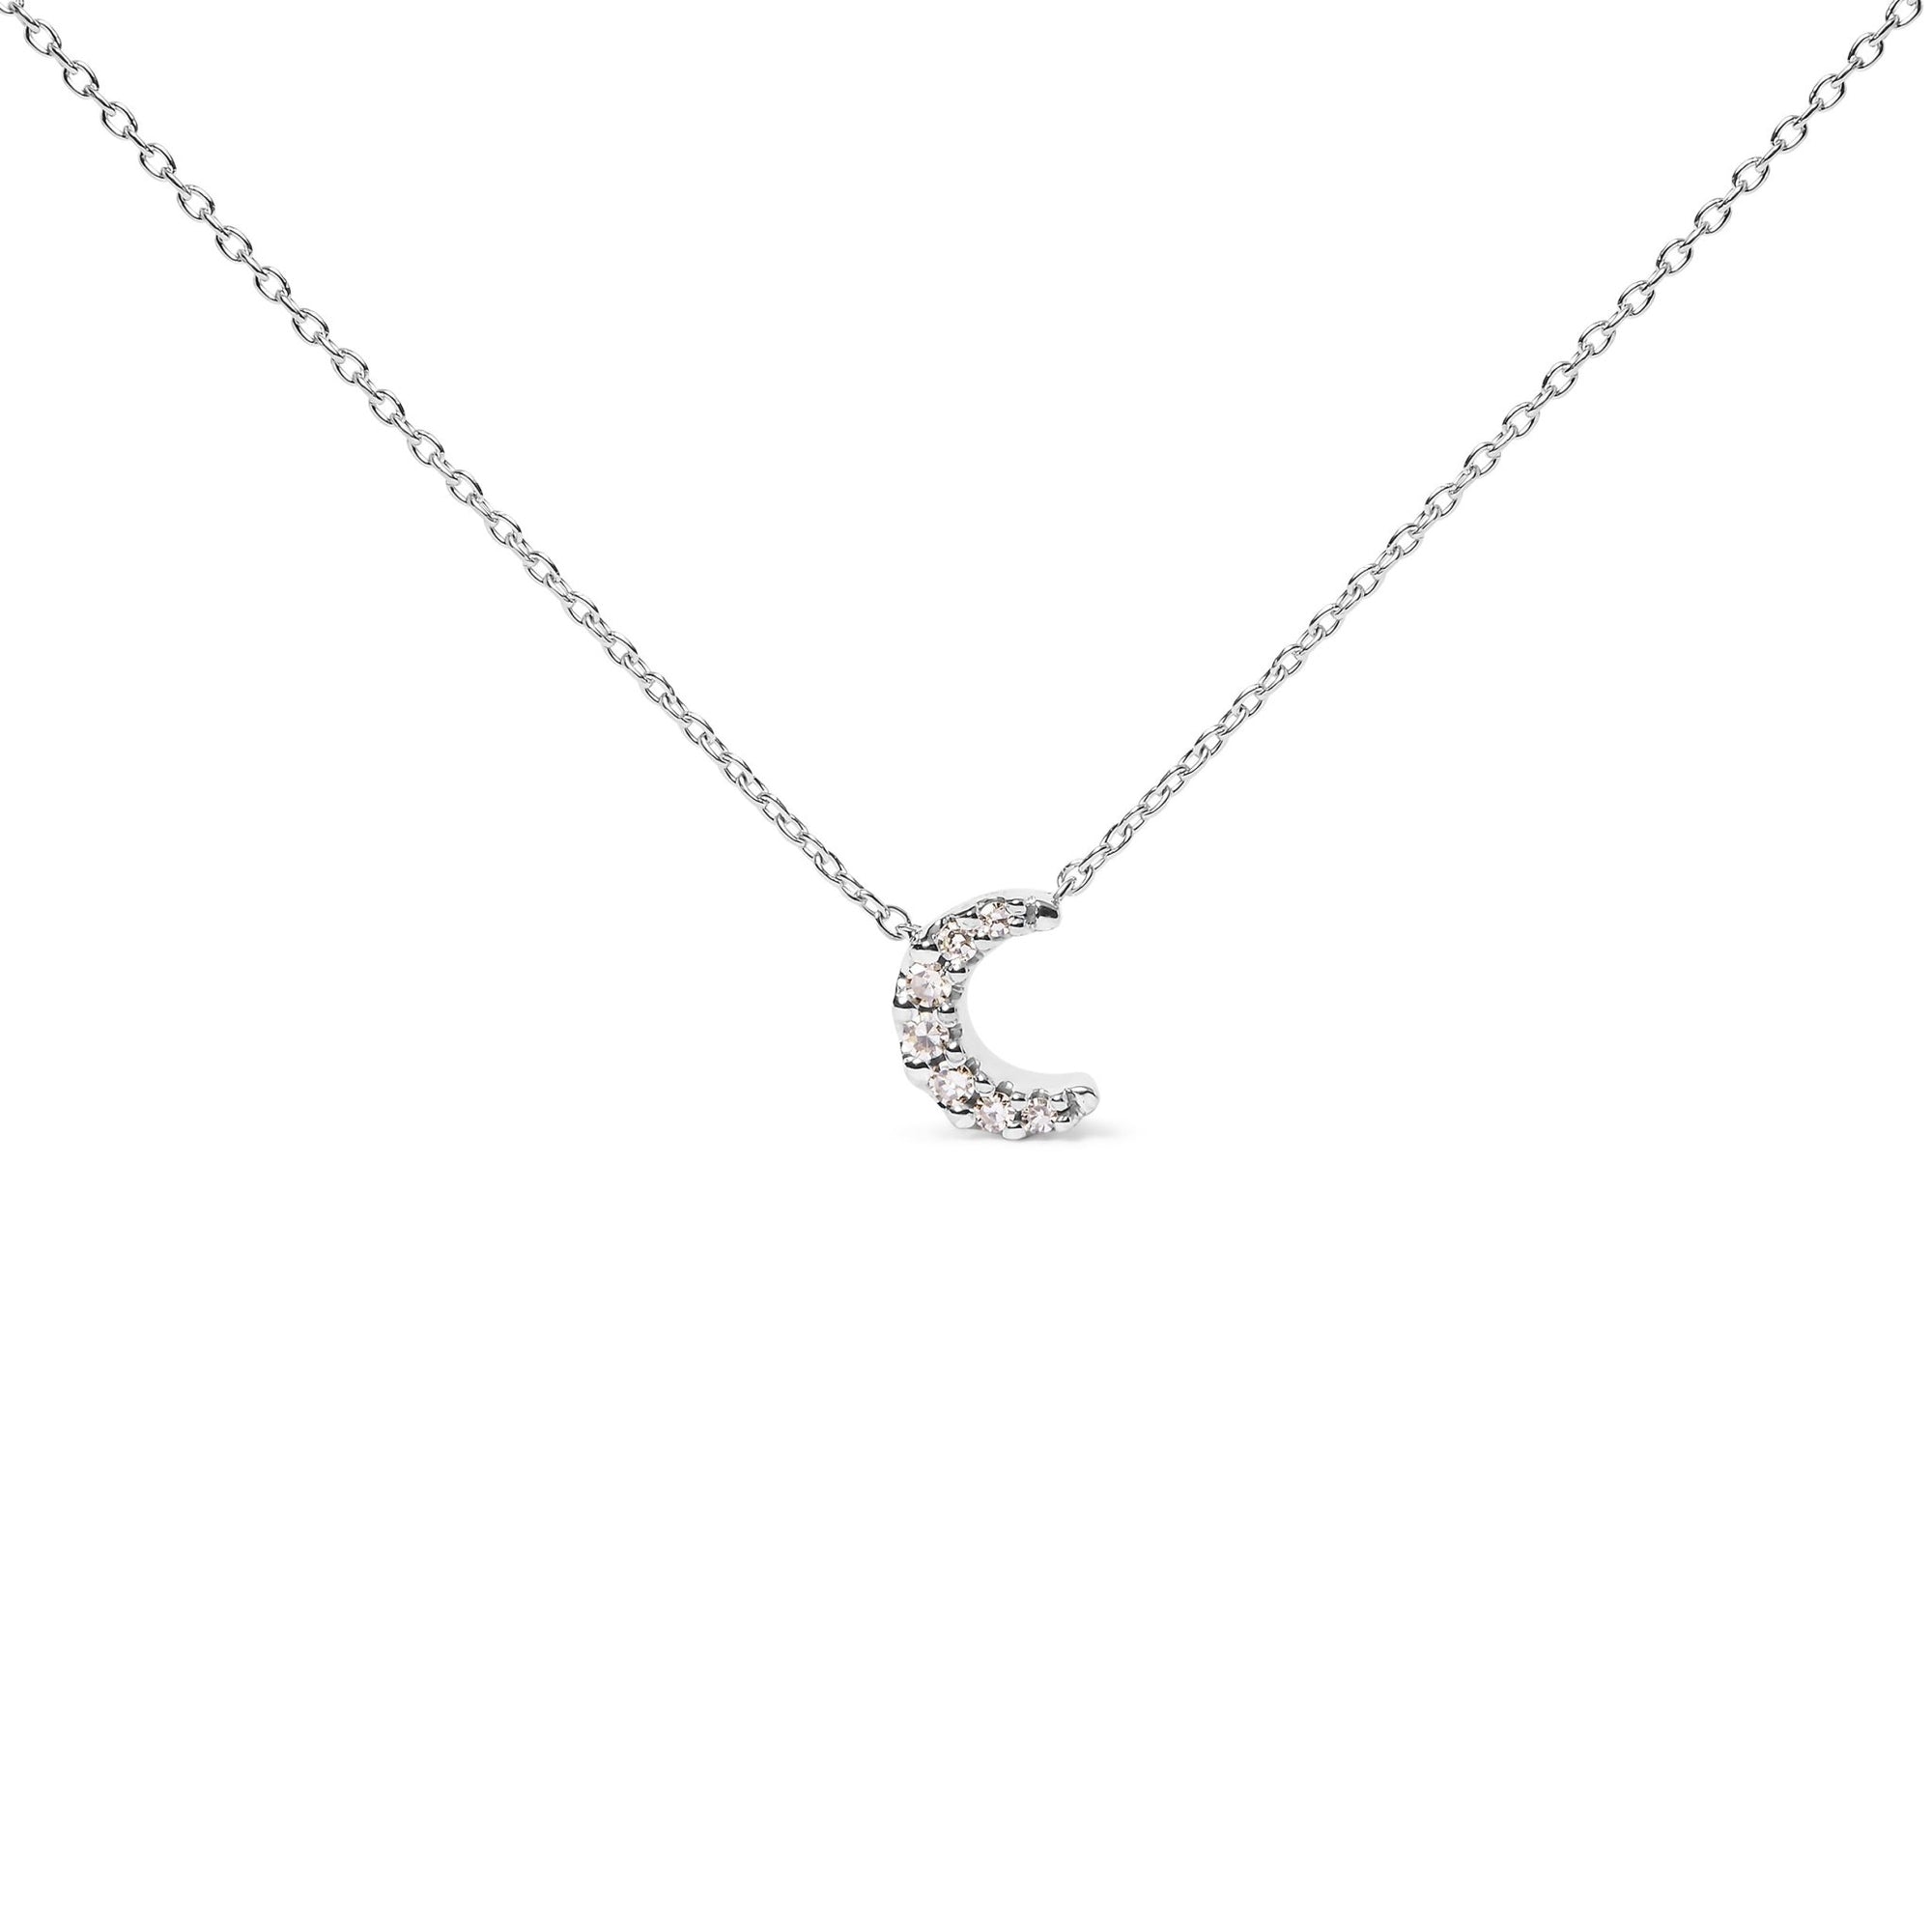 10K White Gold Diamond Accented Crescent Moon Shaped 18" Inch Pendant Necklace (H-I Color, I1-I2 Clarity) - LinkagejewelrydesignLinkagejewelrydesign